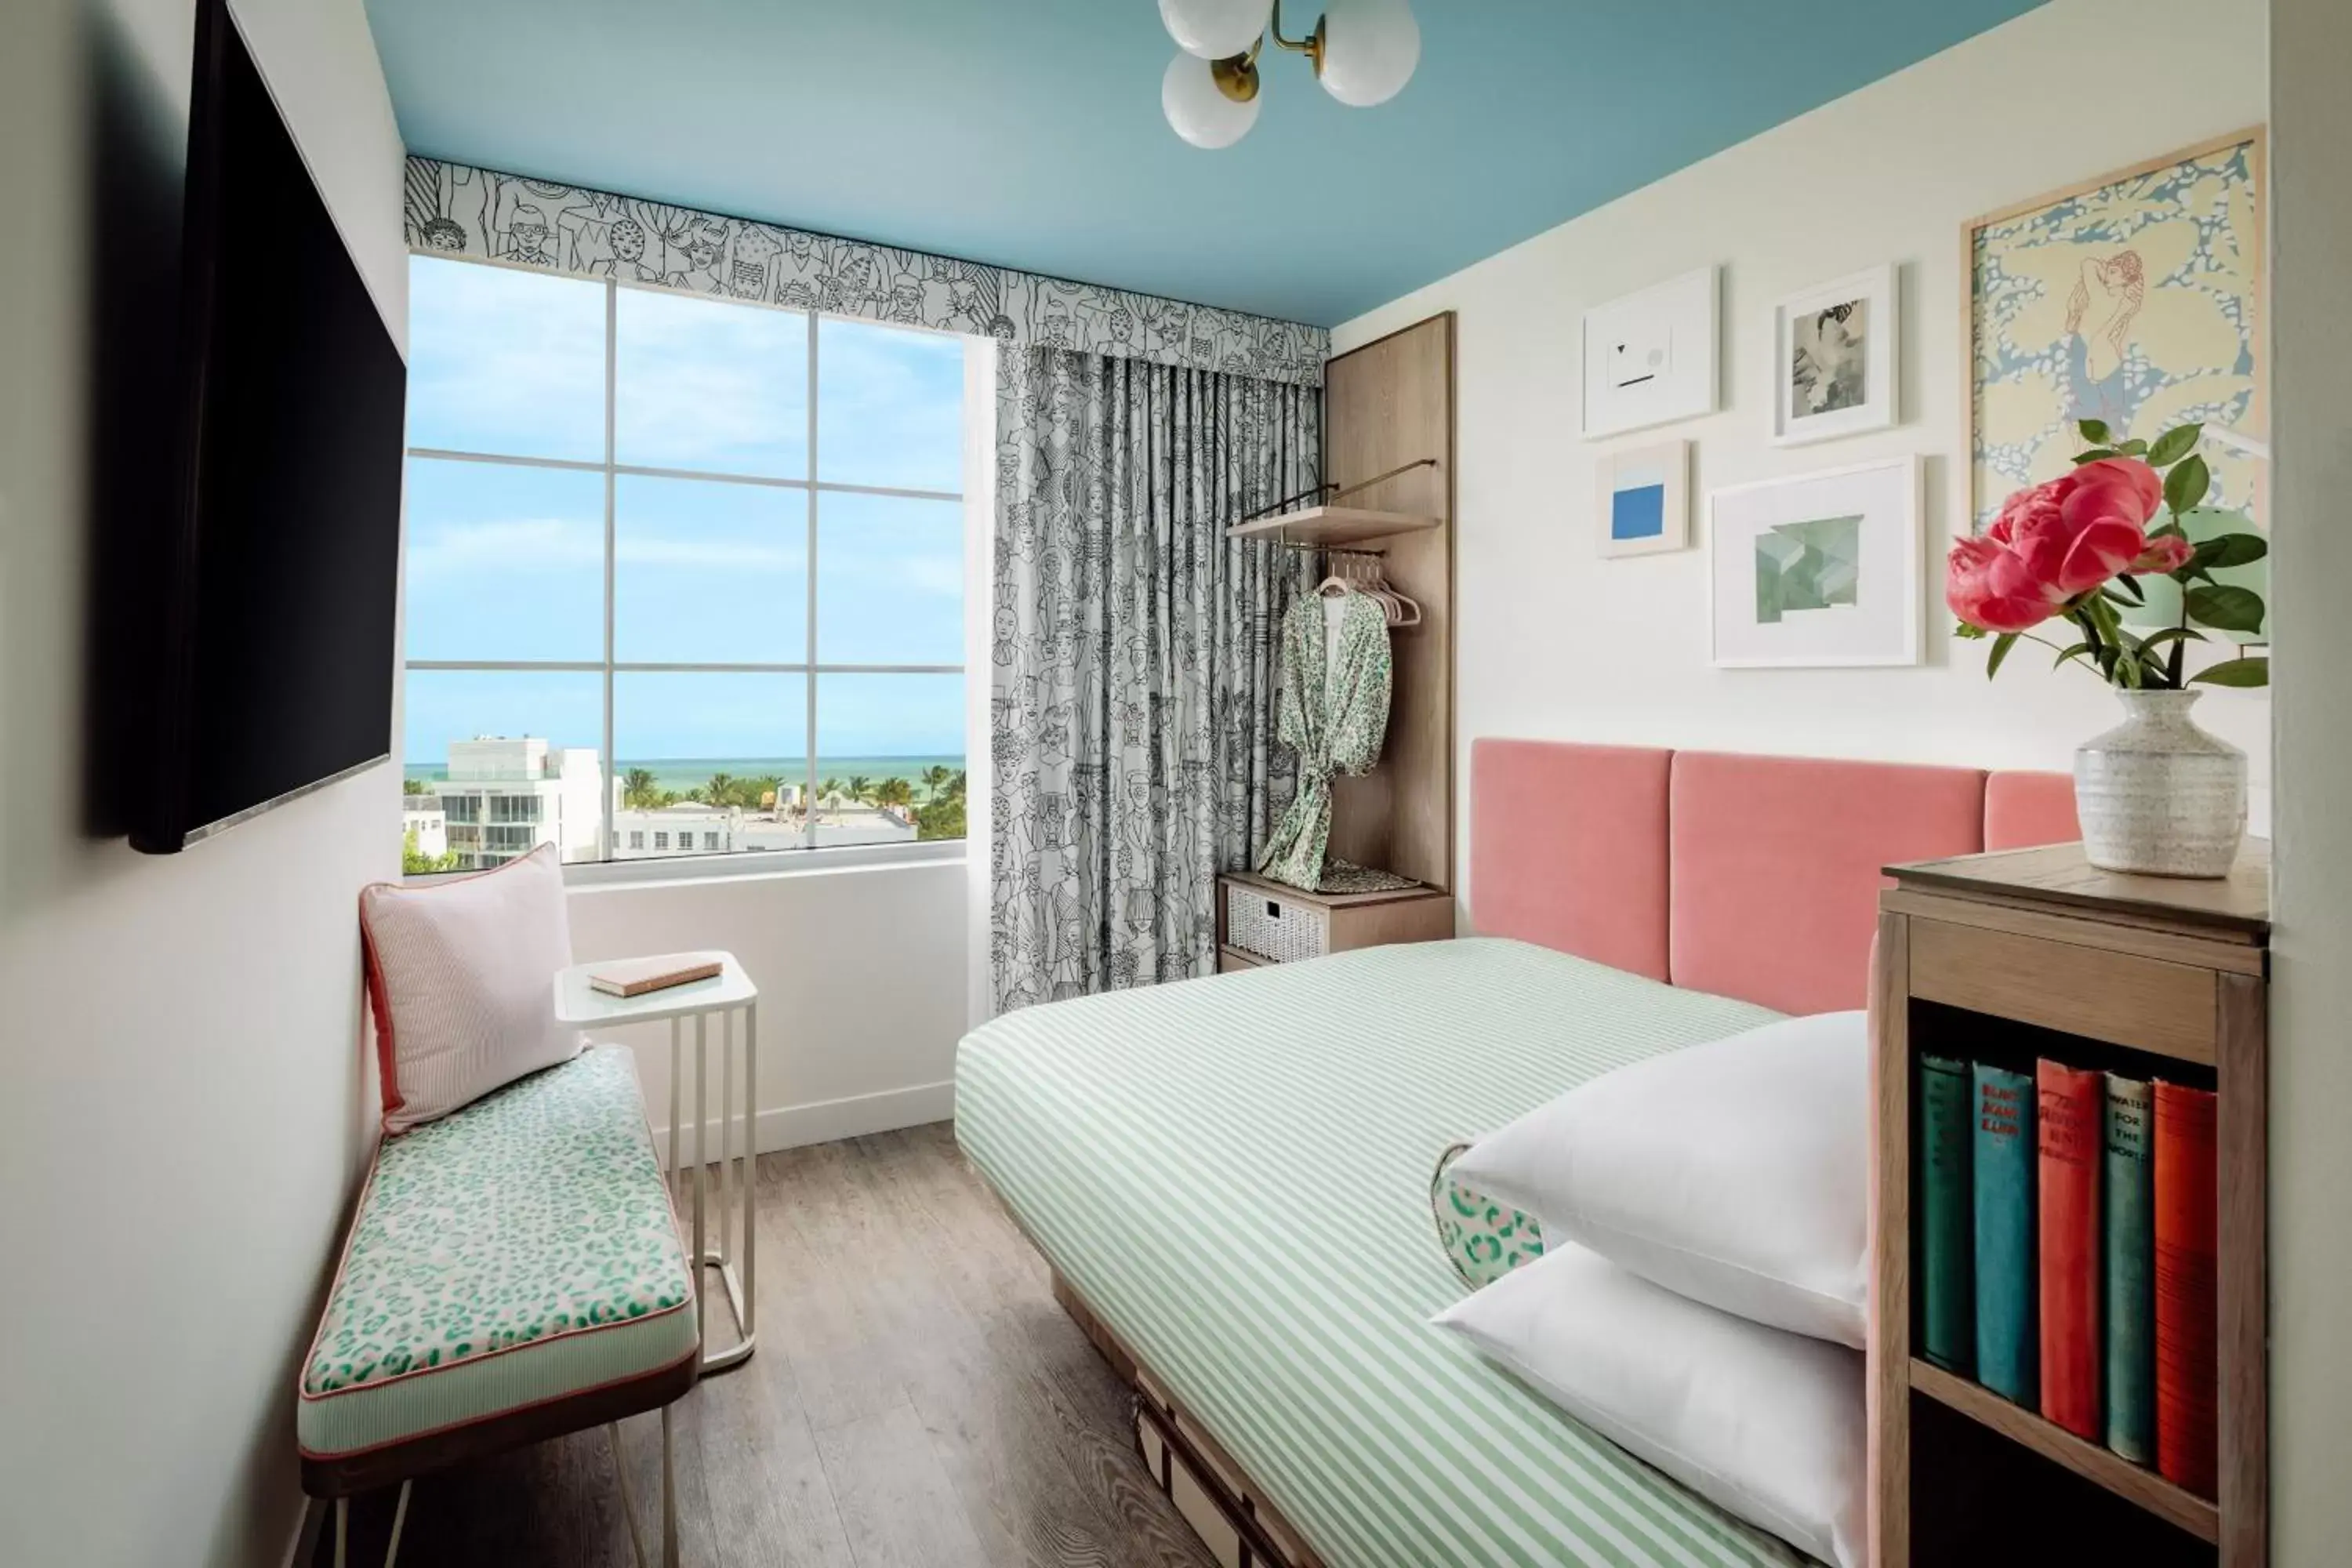 Standard Queen Room with Ocean View in The Goodtime Hotel